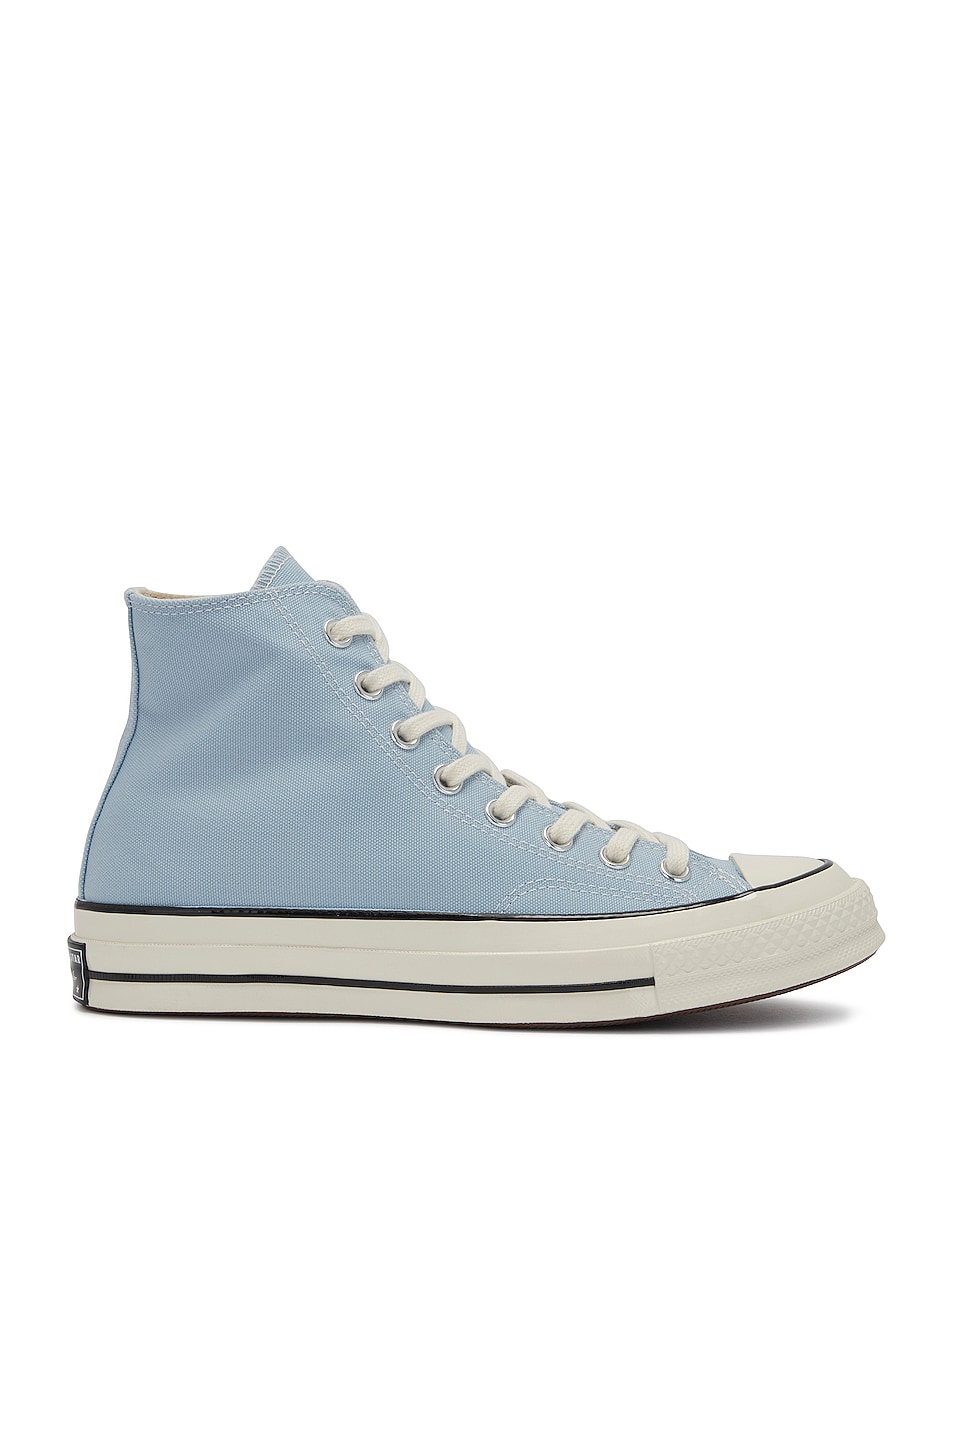 Image 1 of Converse Chuck 70 No Waste Canvas HI in Light Armory Blue, Egret, & Black